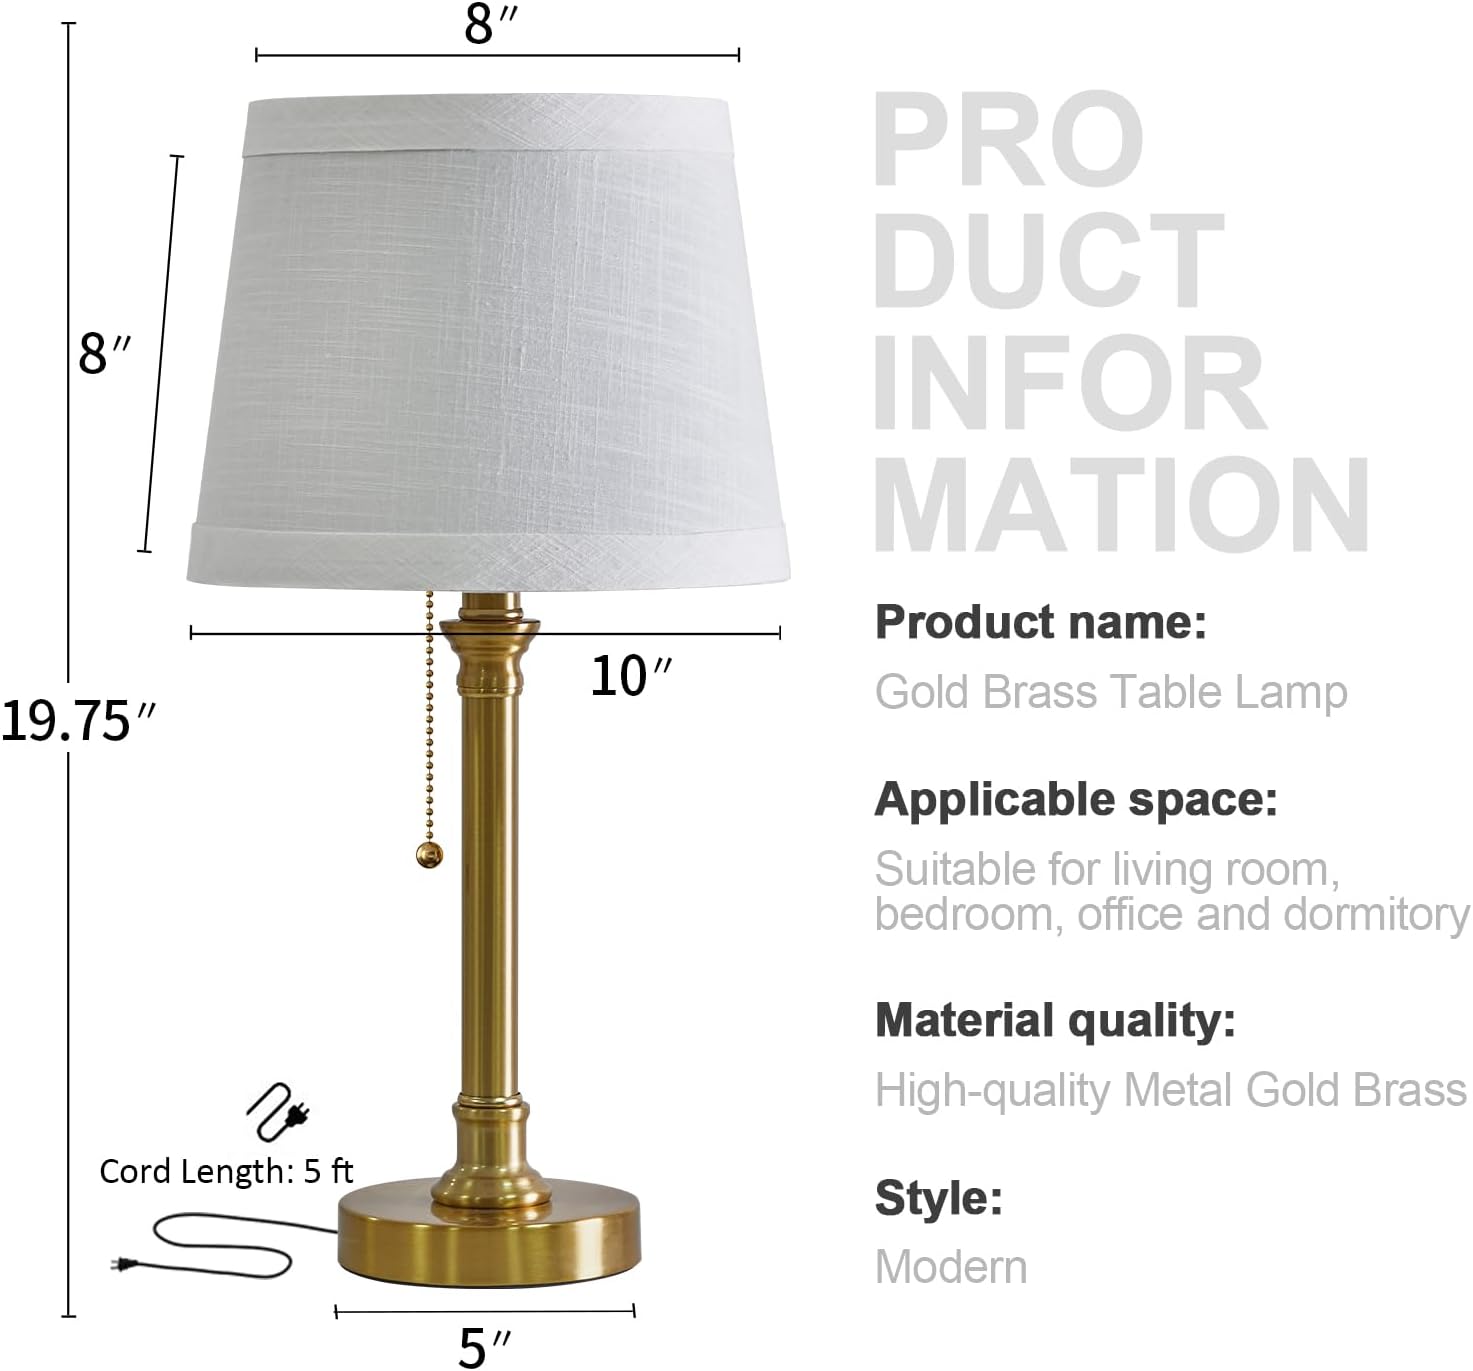 Oneach Brass Table Lamp information